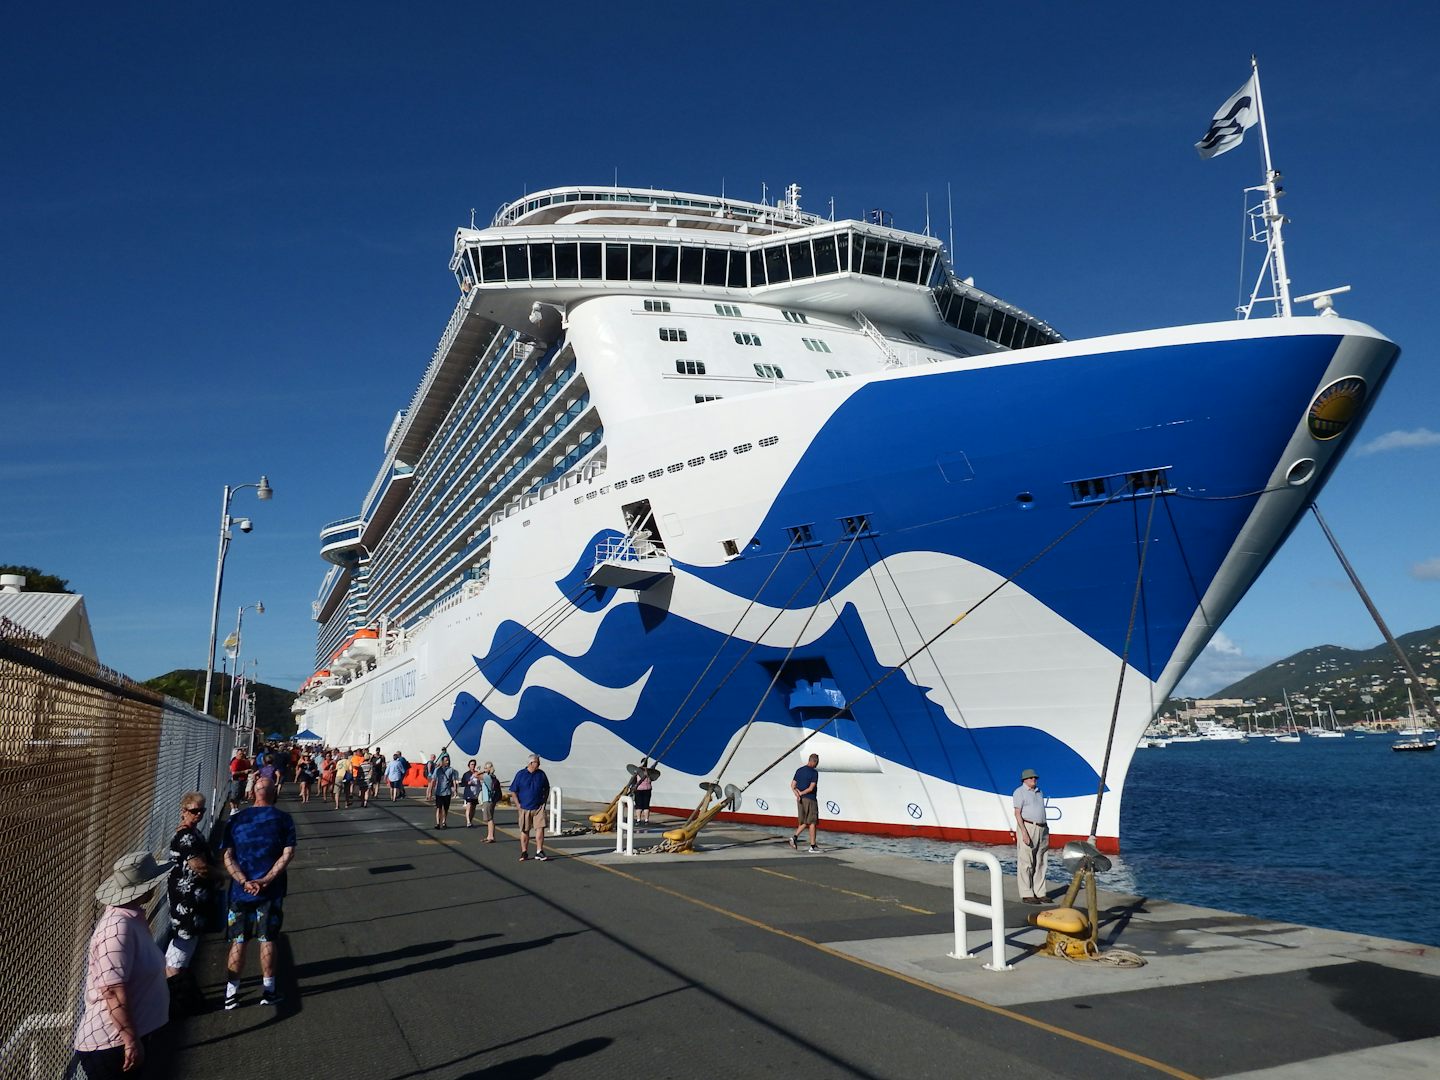 New sea witch logo on the bow of the Royal Princess